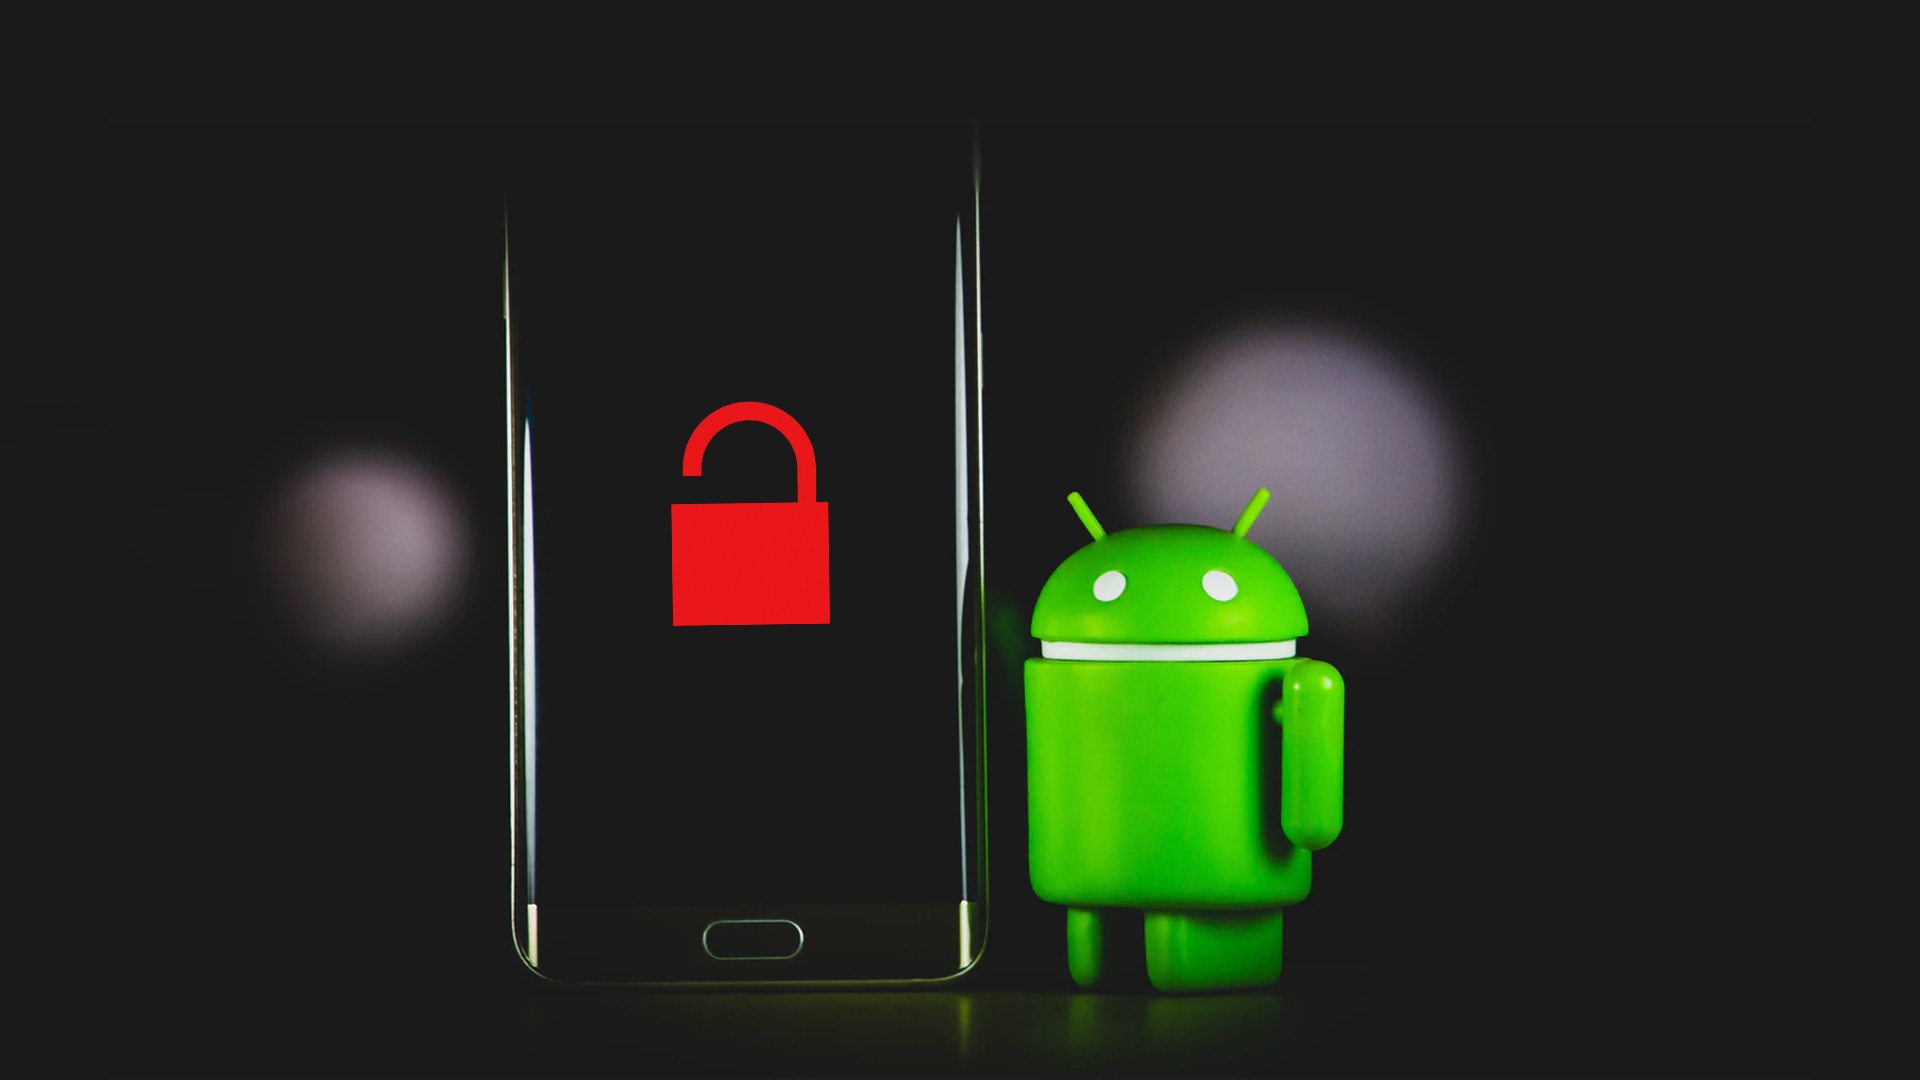 Malware on Android: Fake file manager that steals bank details removed from Play Store
